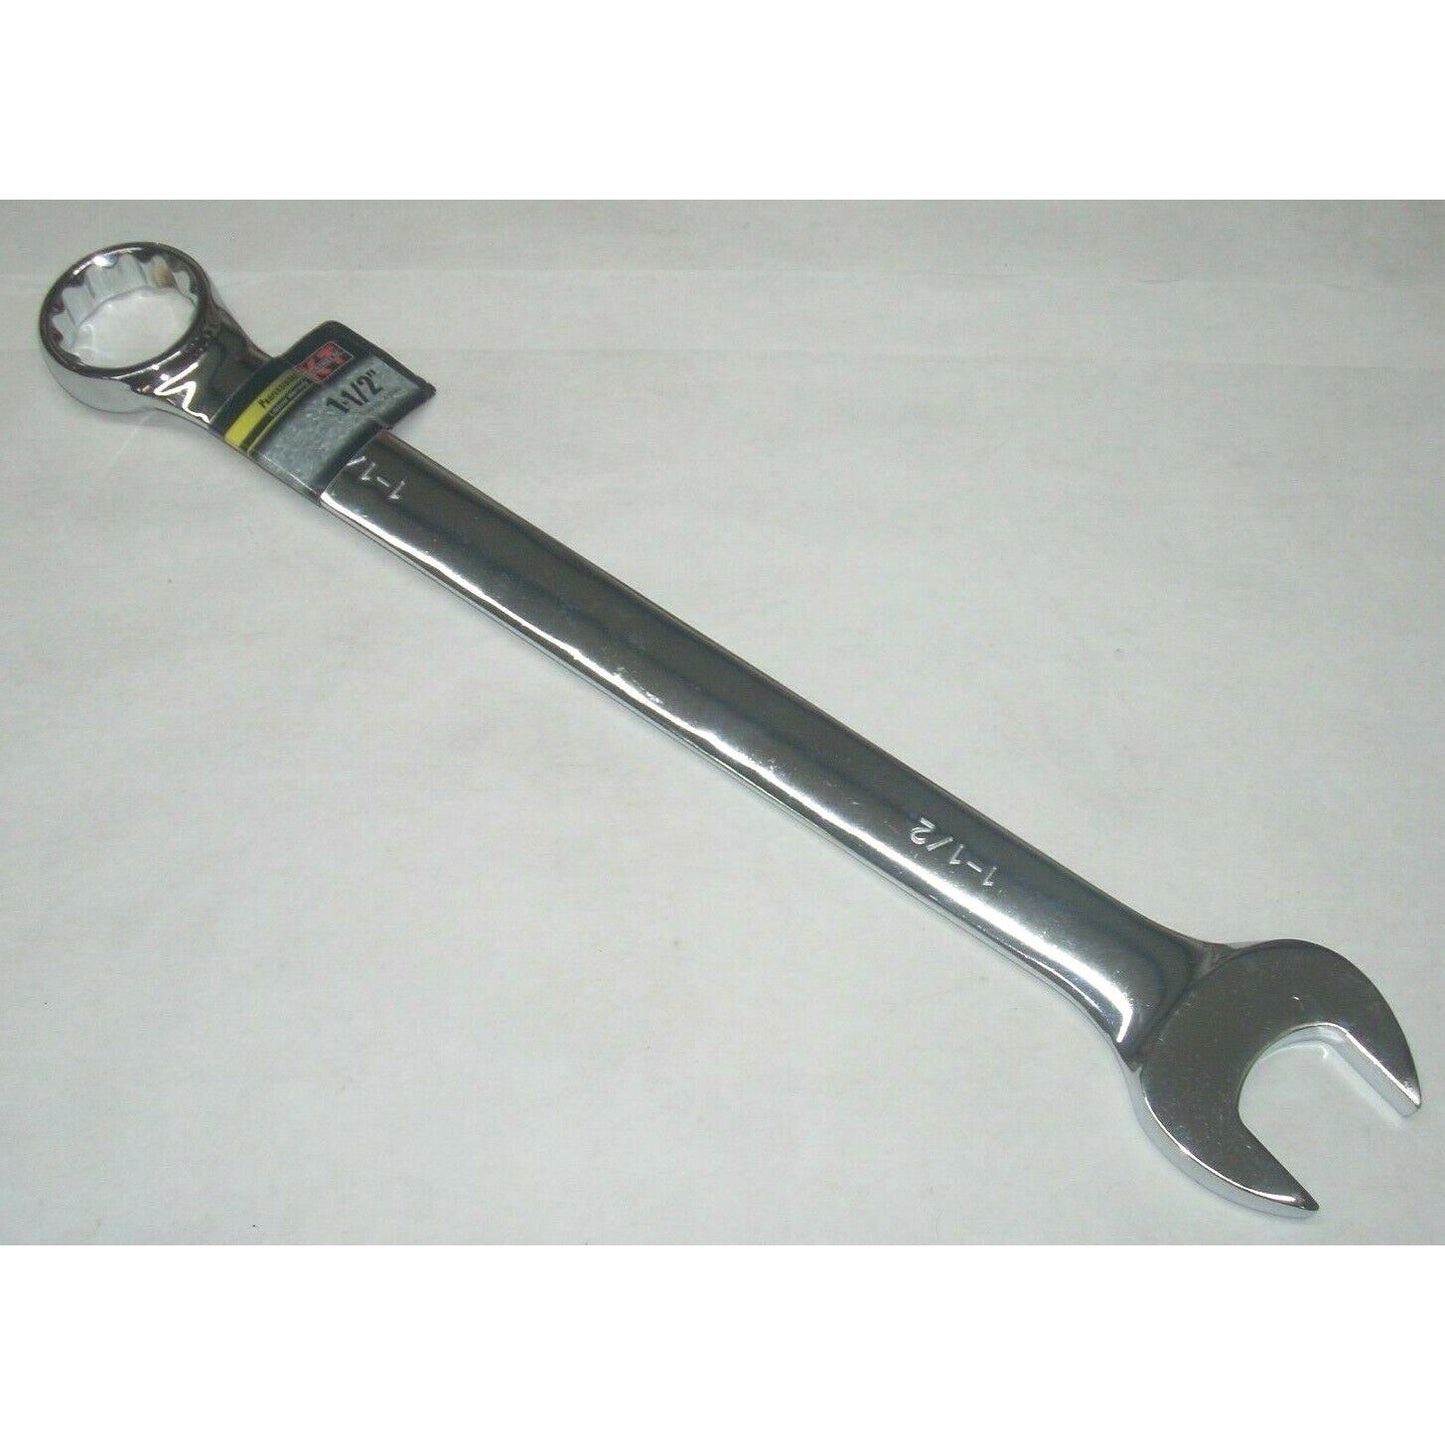 KT Industries 4-2748 Combination Wrench 1 1/2"